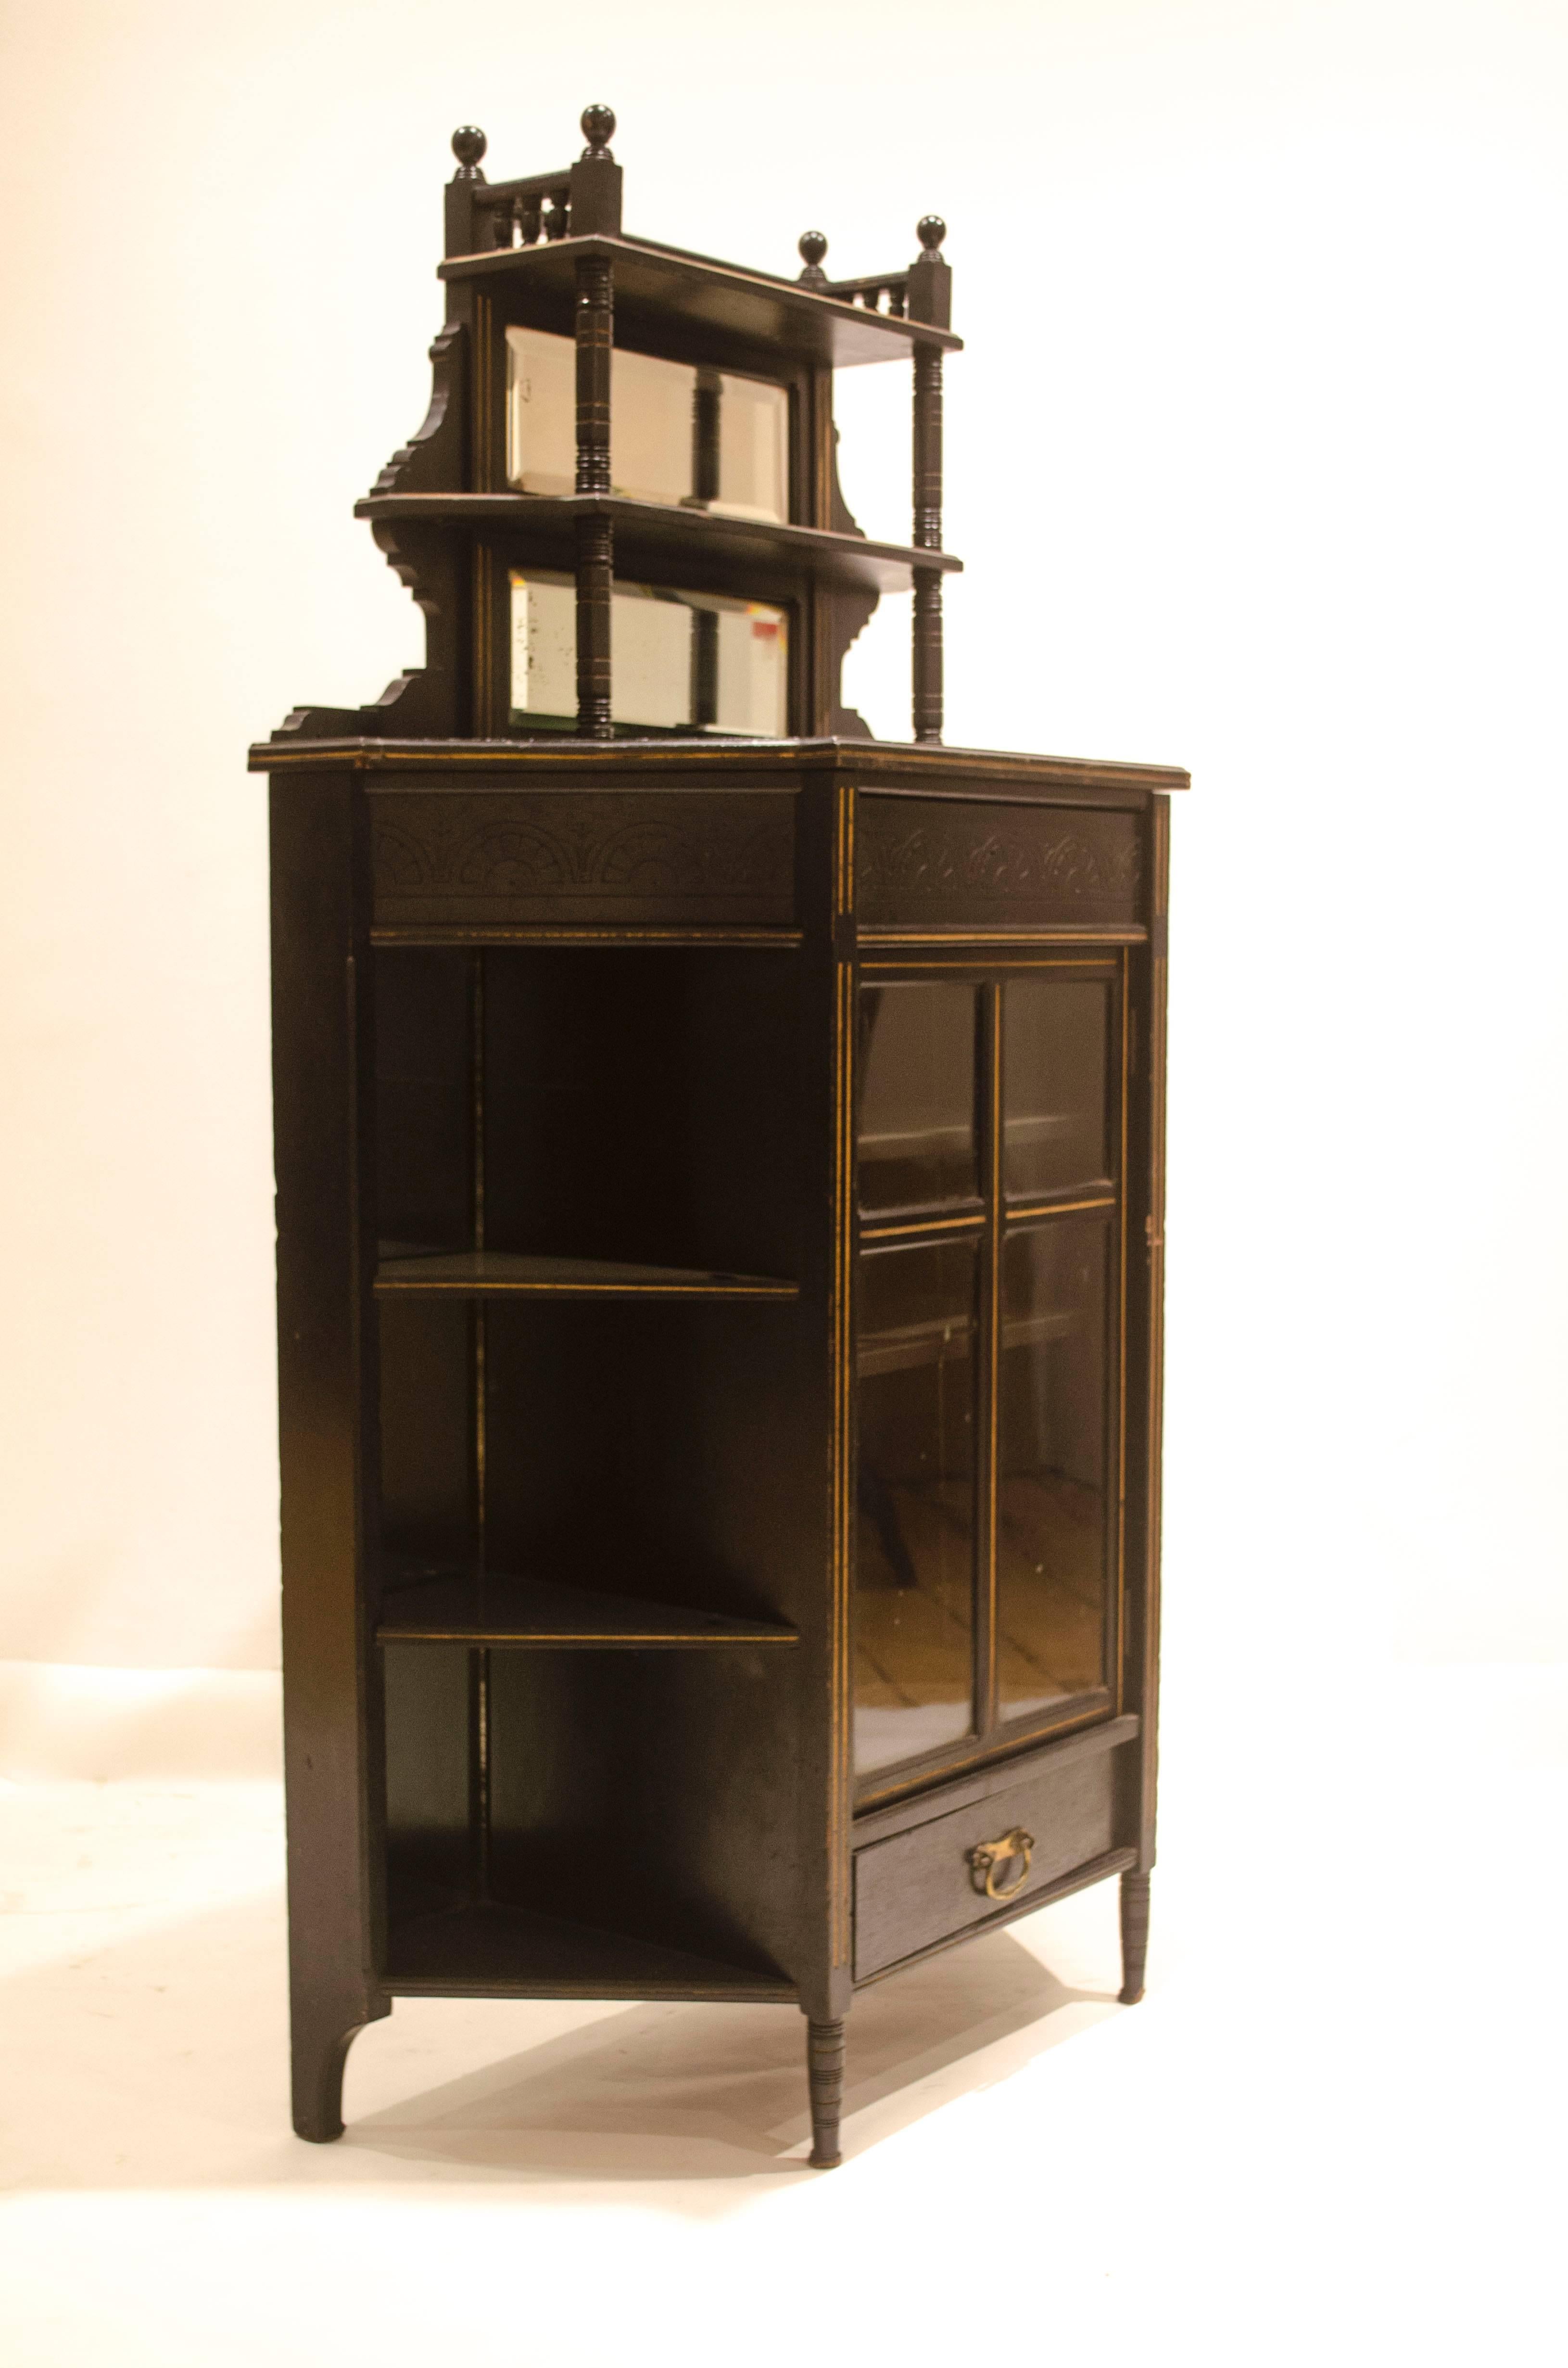 Edward William Godwin made by William Watt, with applied enamel label.
An Important Anglo-Japanese ebonised display cabinet with an upper and lower drawer, the upper drawer a secret drawer concealed behind the carved central half